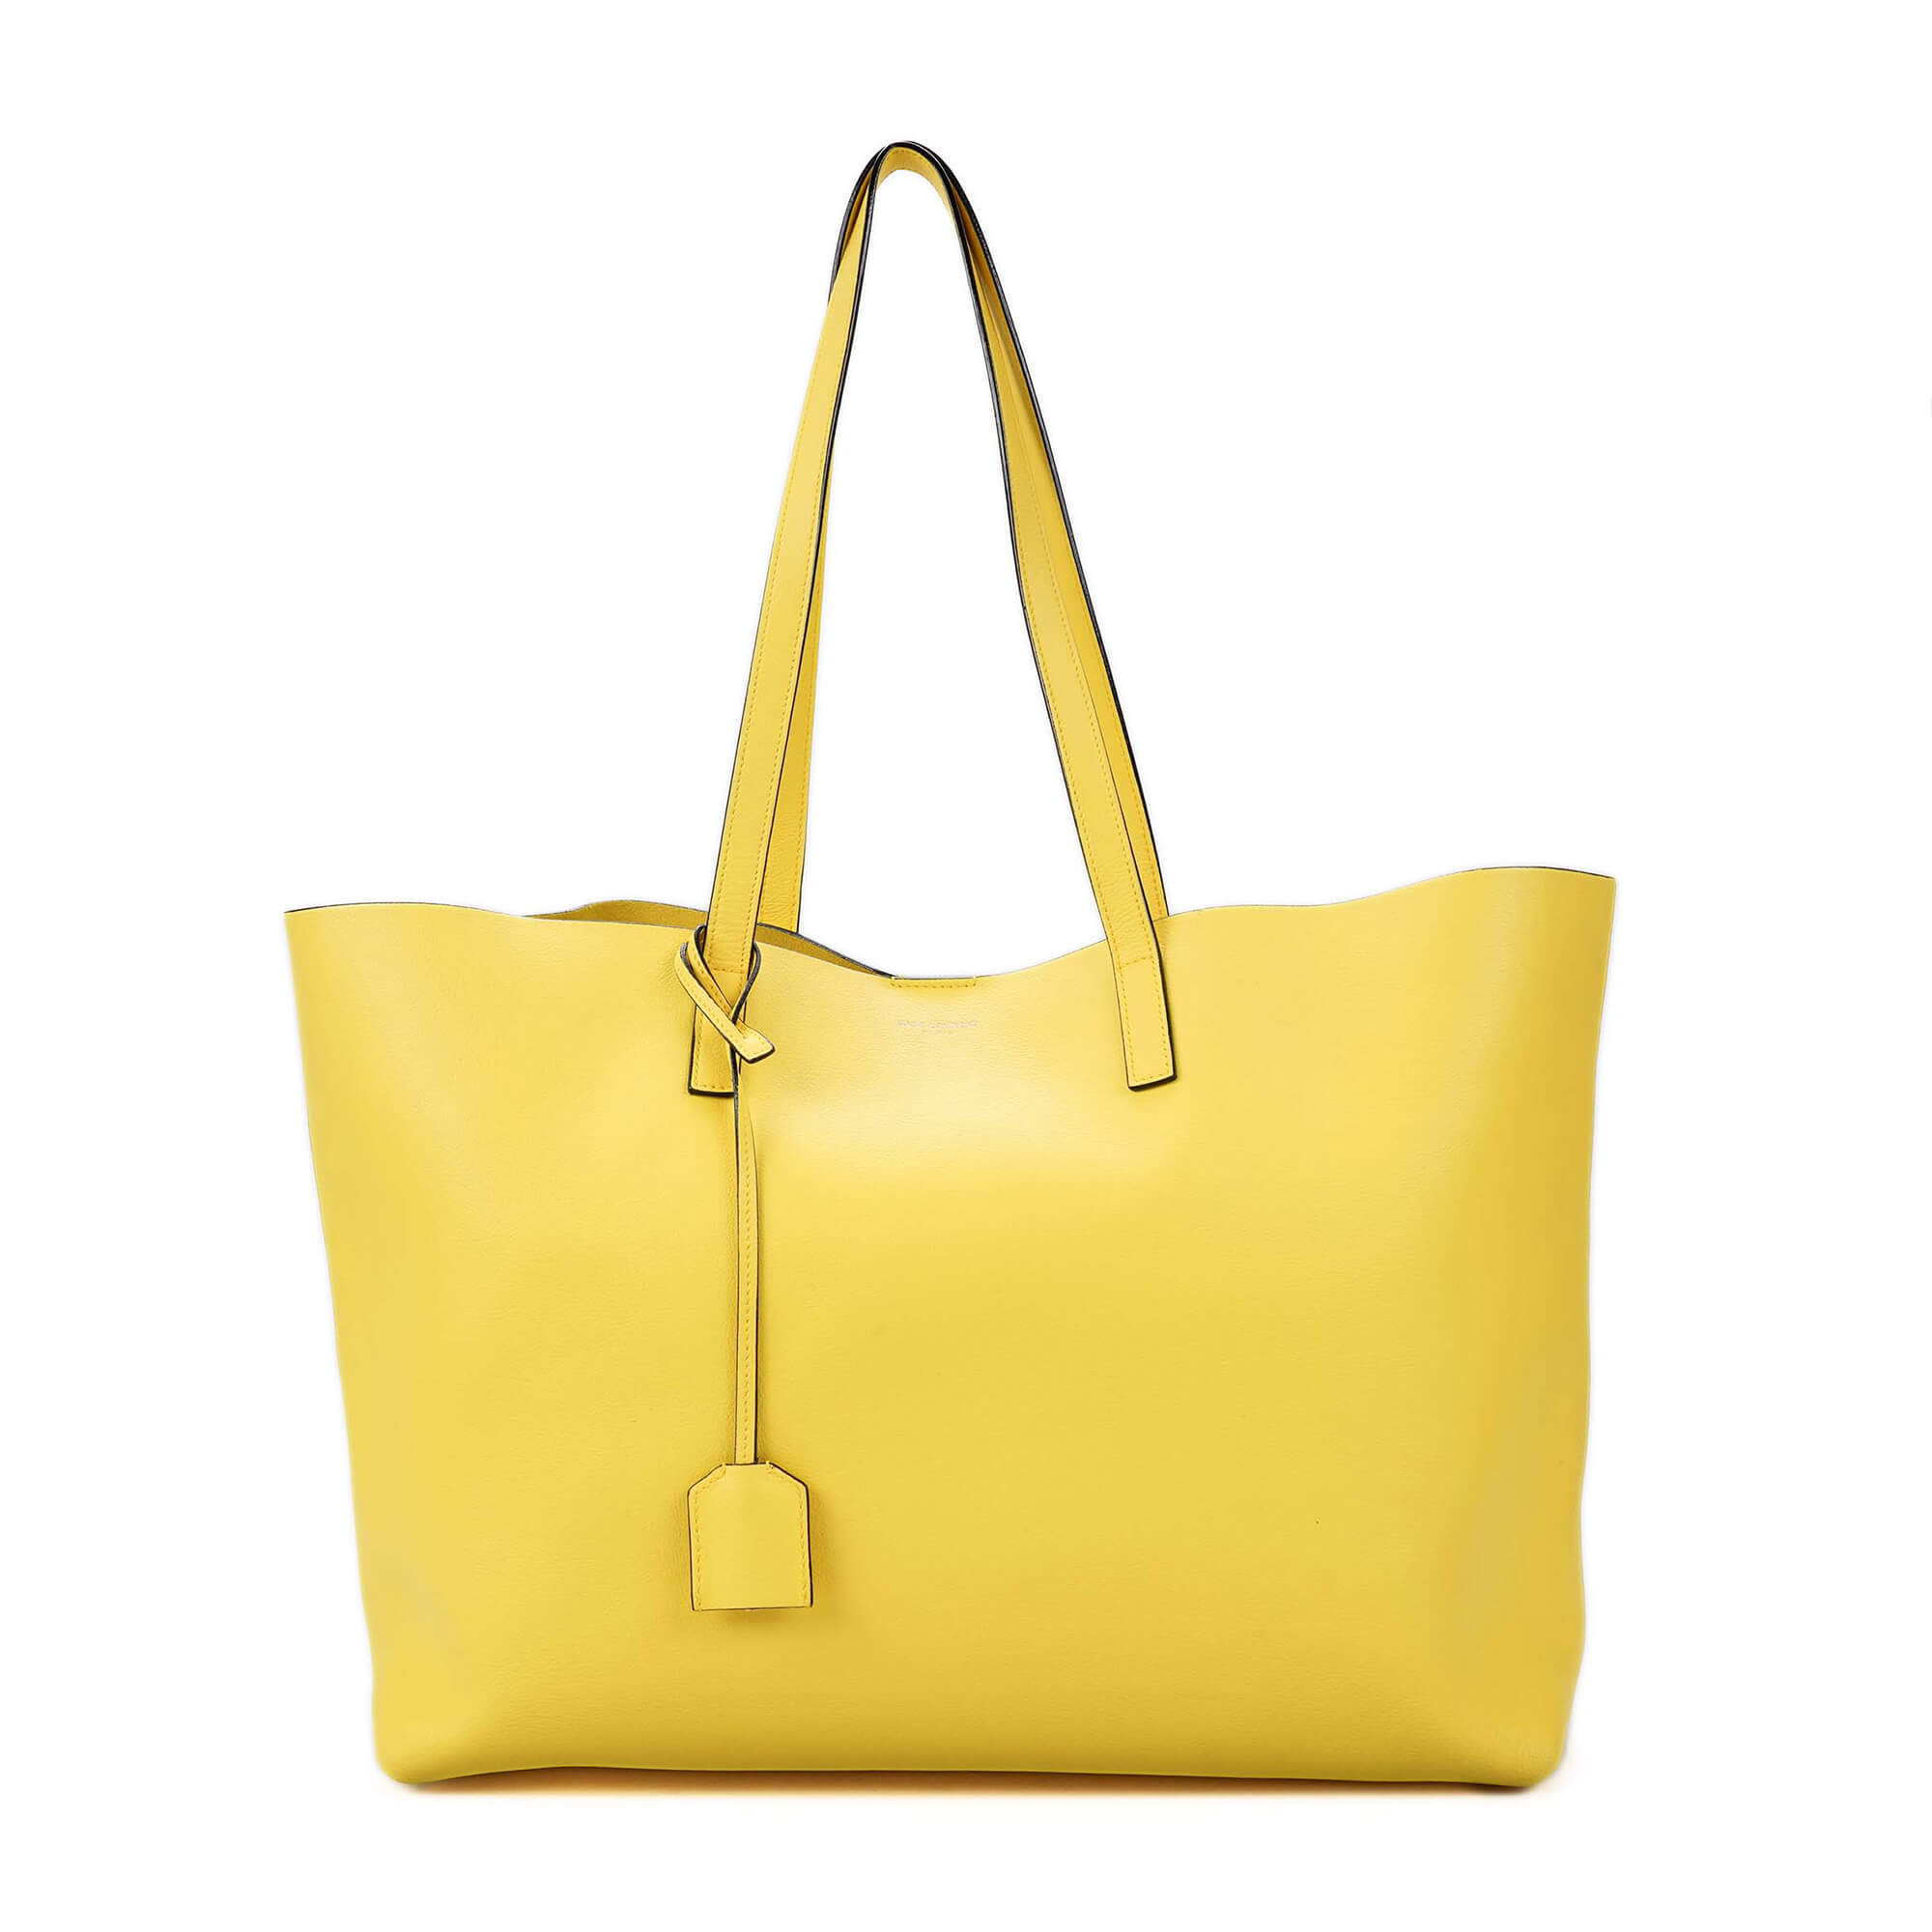 Yves Saint Laurent - Yellow Leather East West Tote Bag